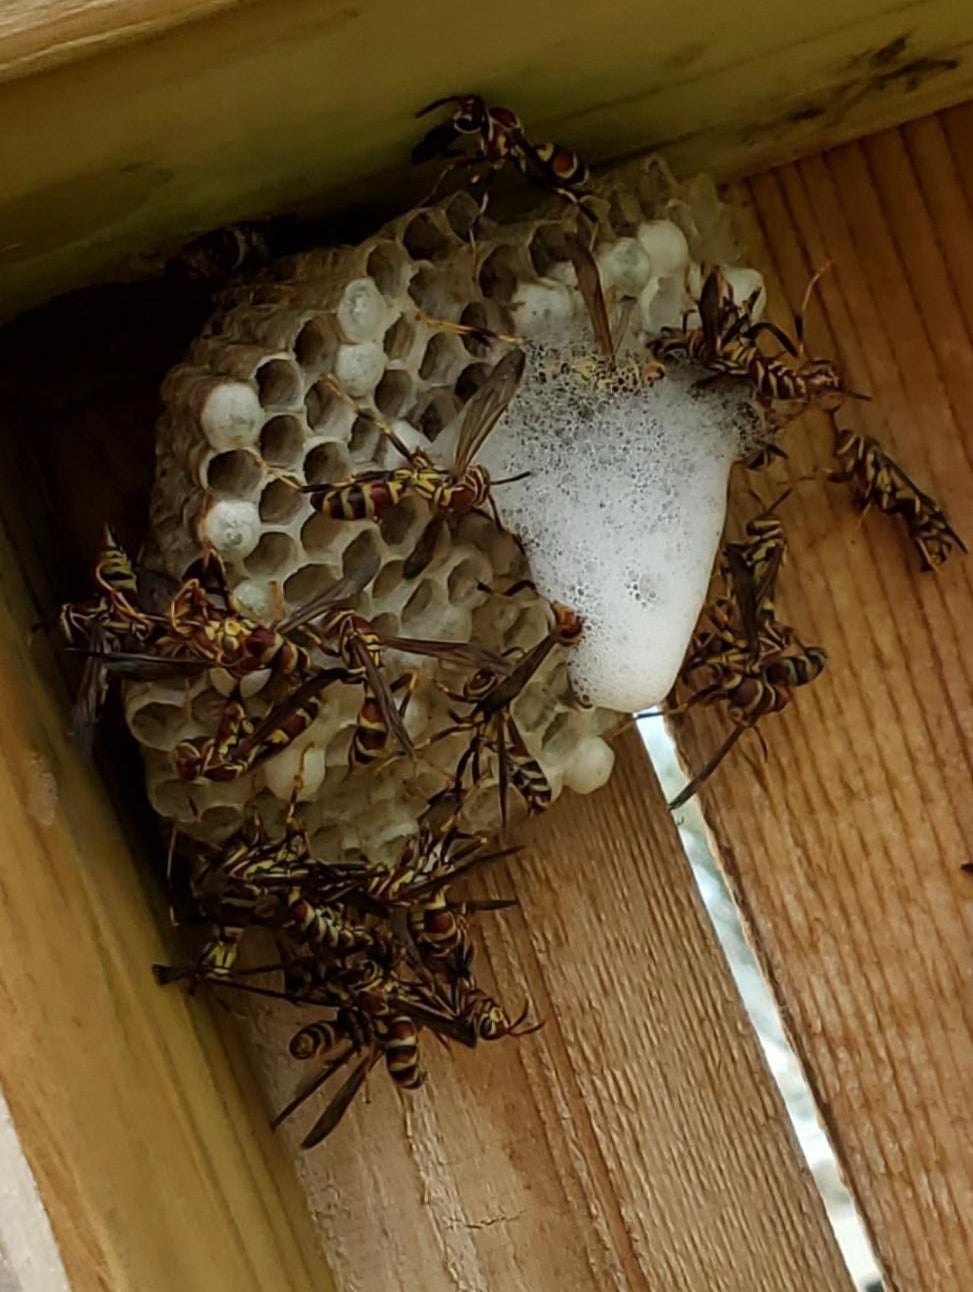 wasp nest with white foam on it